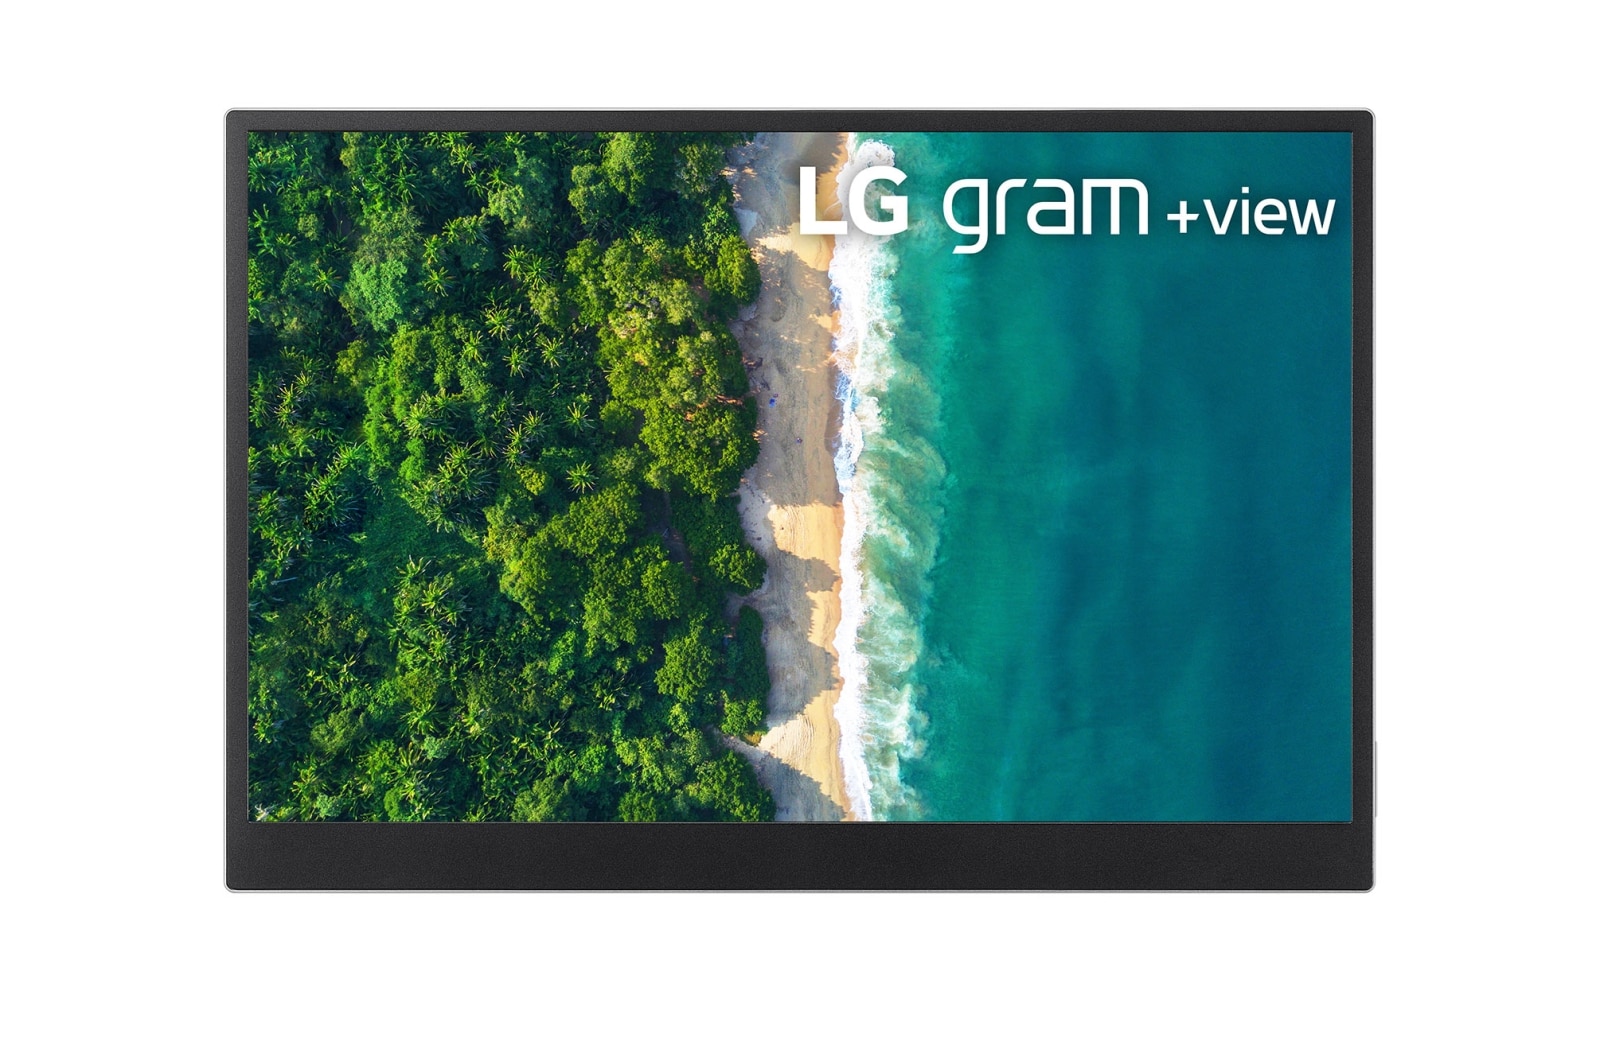 LG 16 (40.6cm) +view for LG gram Portable Monitor with USB Type-C™, 16MQ70